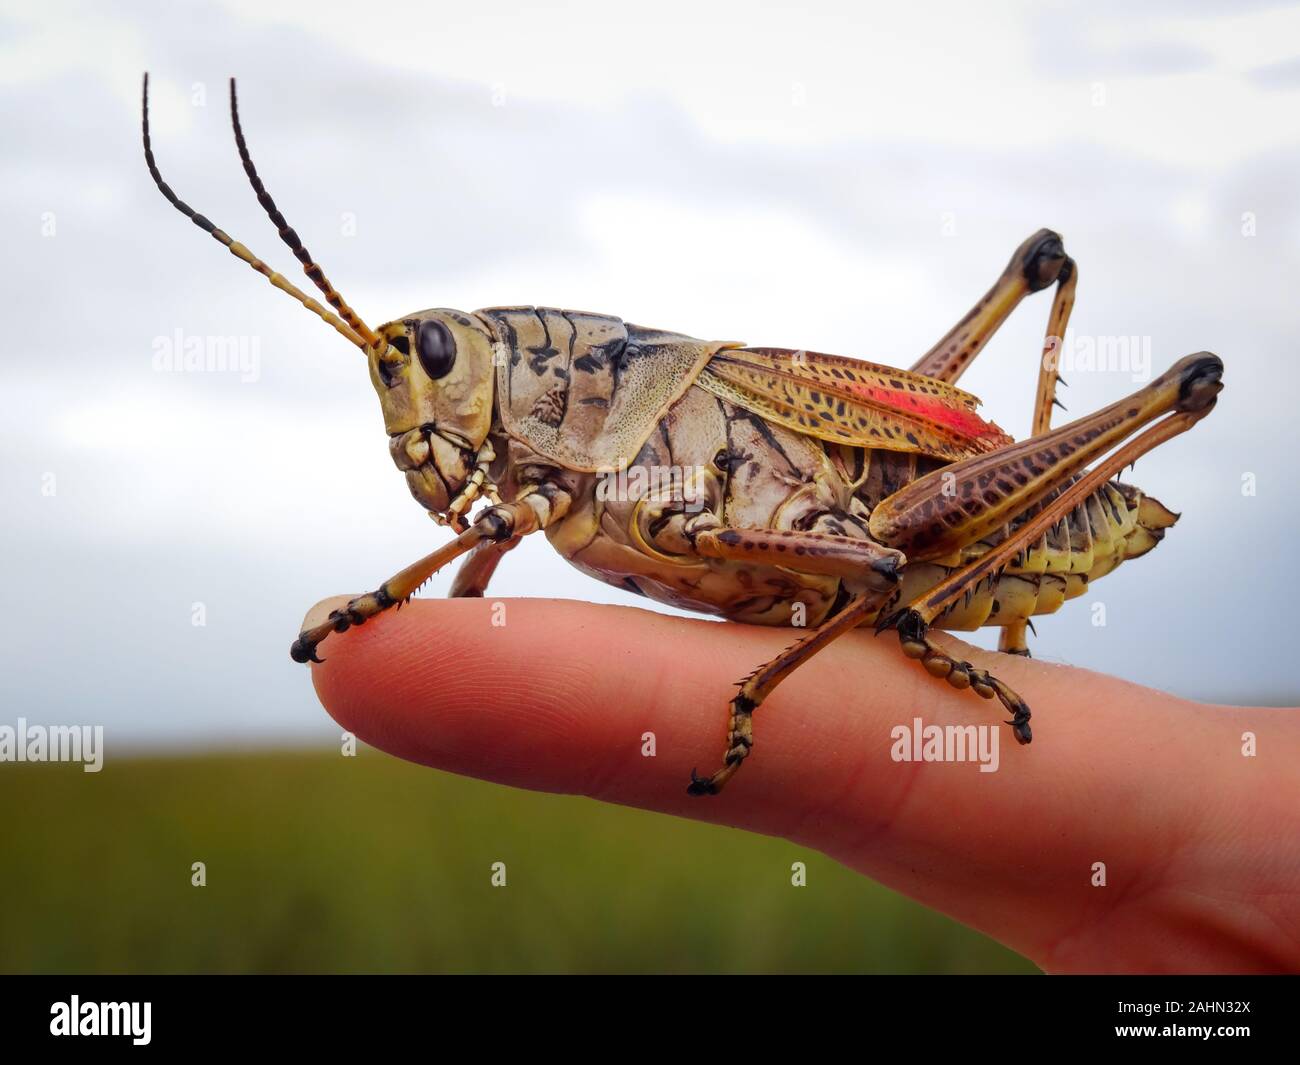 Detailed Closeup Of Giant Yellow And Brown Grasshopper Or Cricket Sitting And Posing On Finger With Everglades Florida In Background Grass And Cloud Stock Photo Alamy